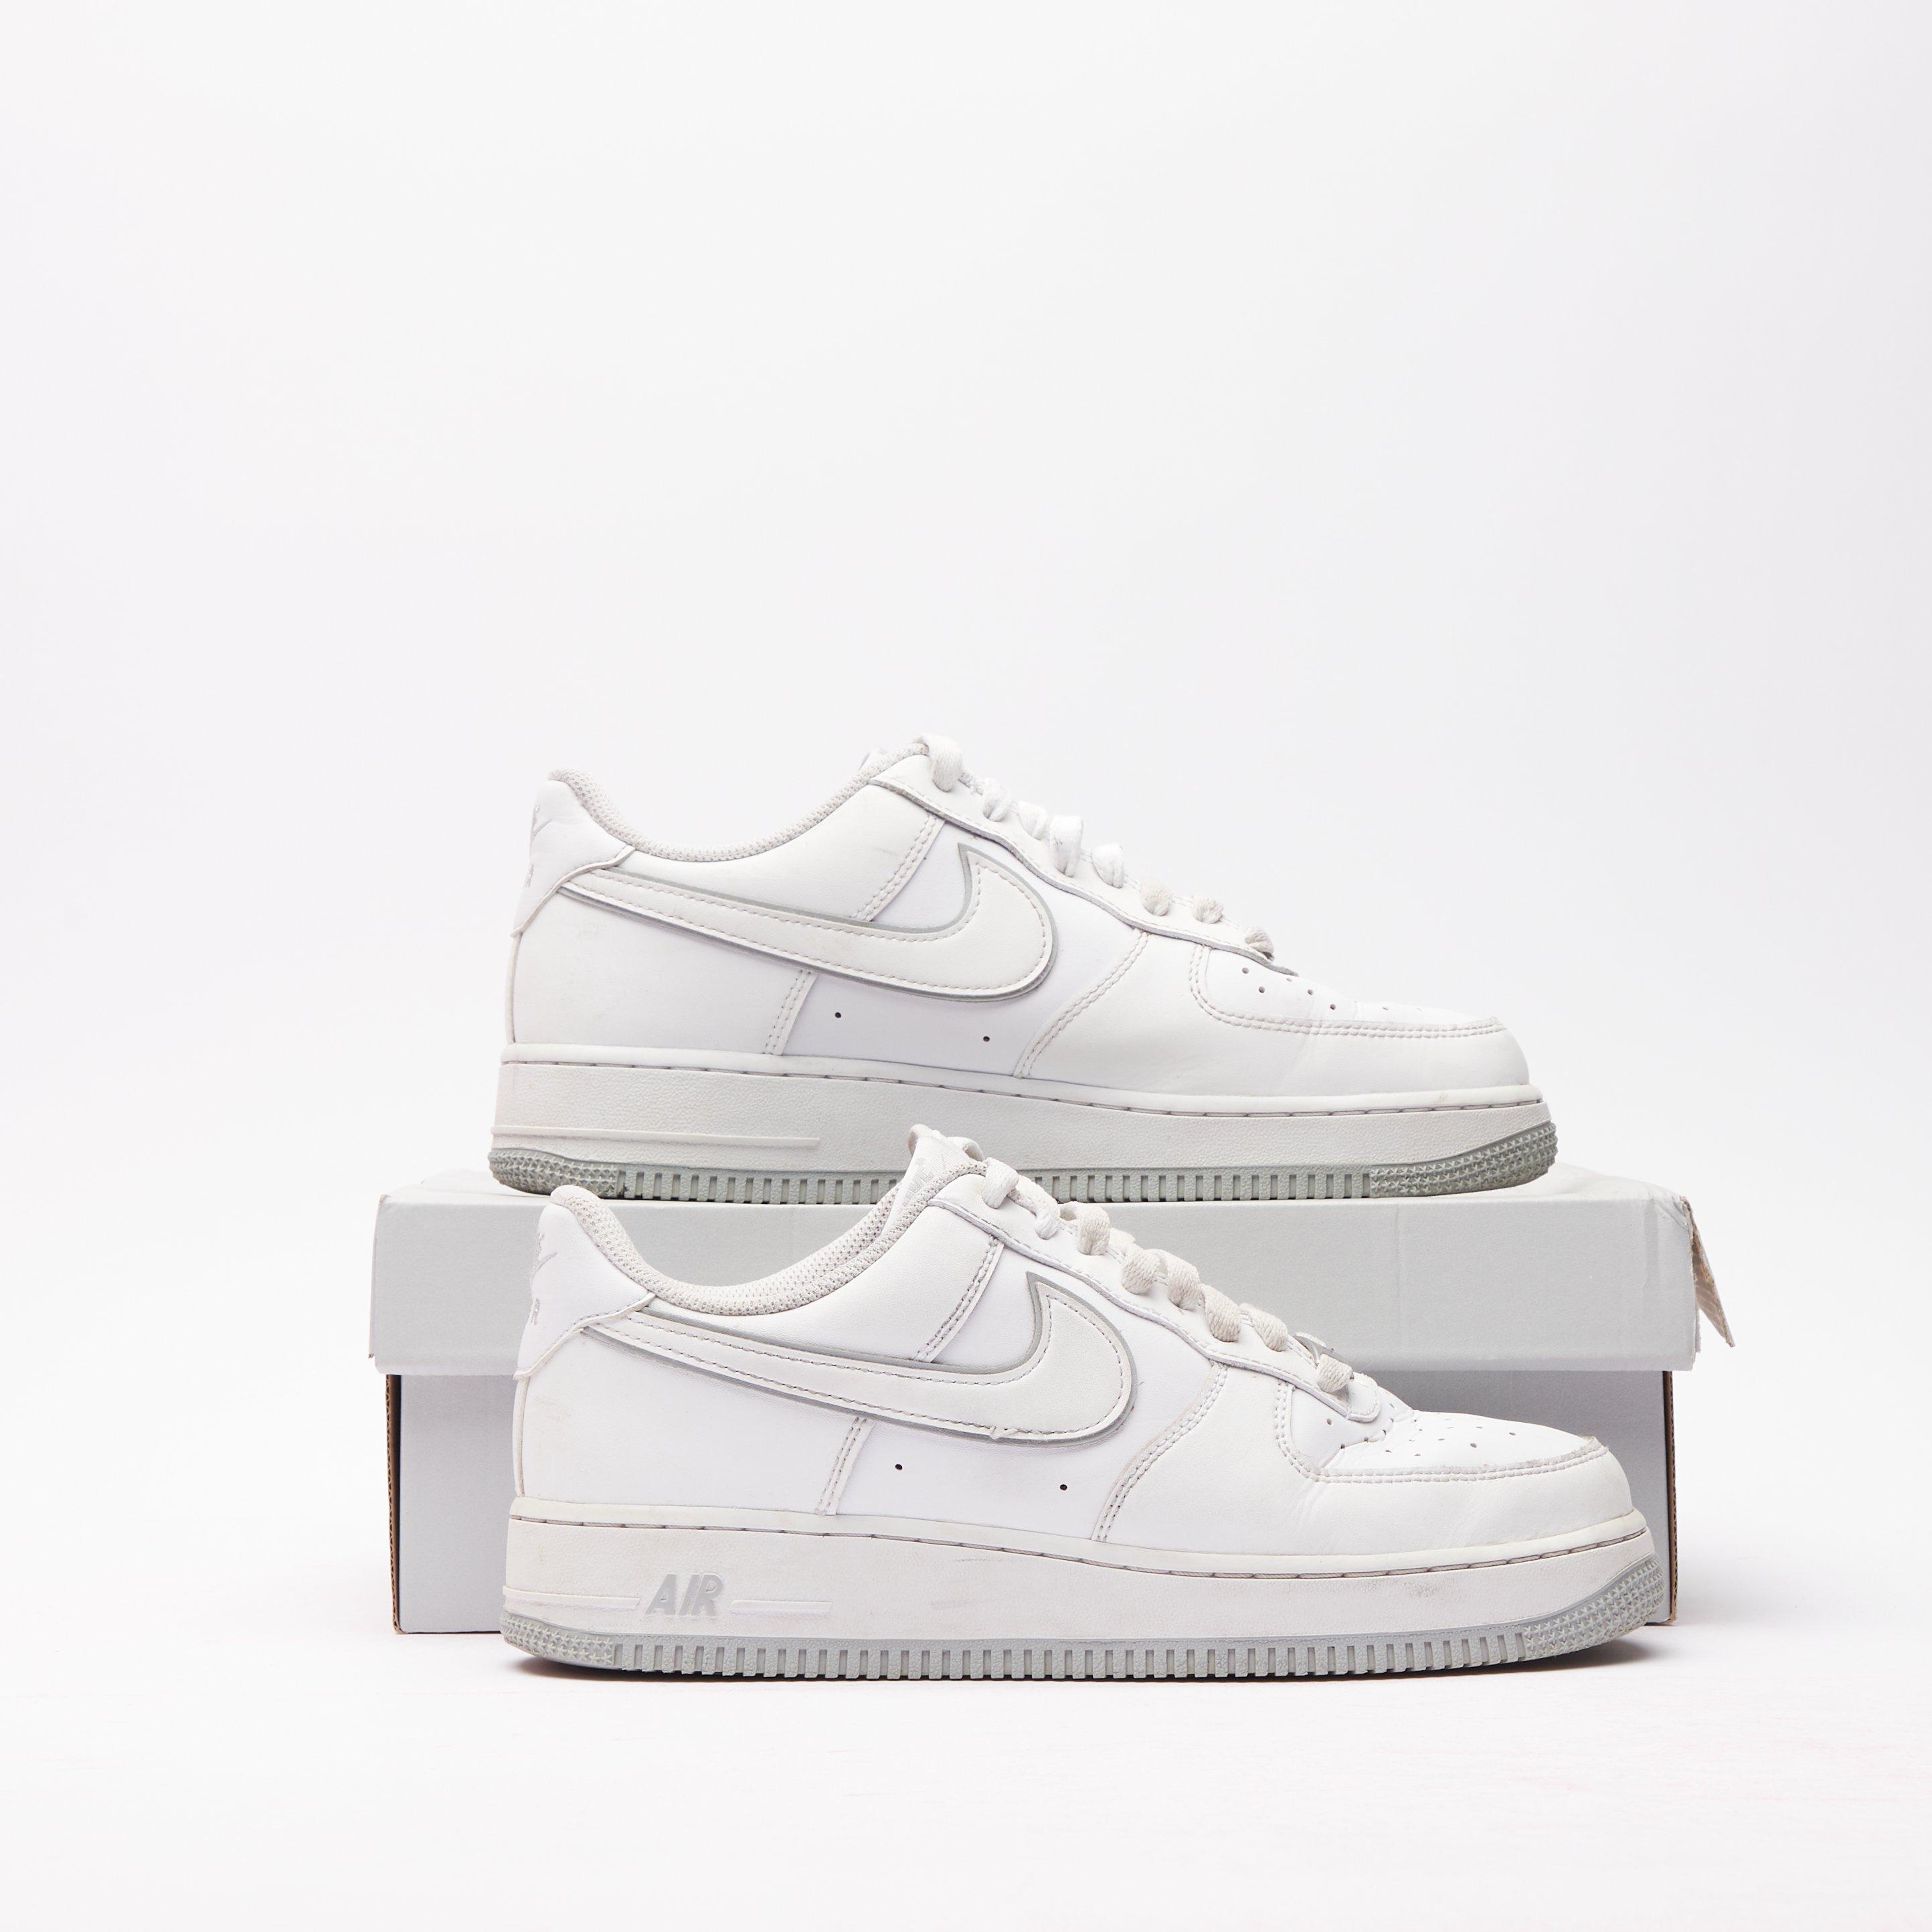 NIKE Air Force 1 Low Men's White/Grey SIZE 7 Trainers | eBay